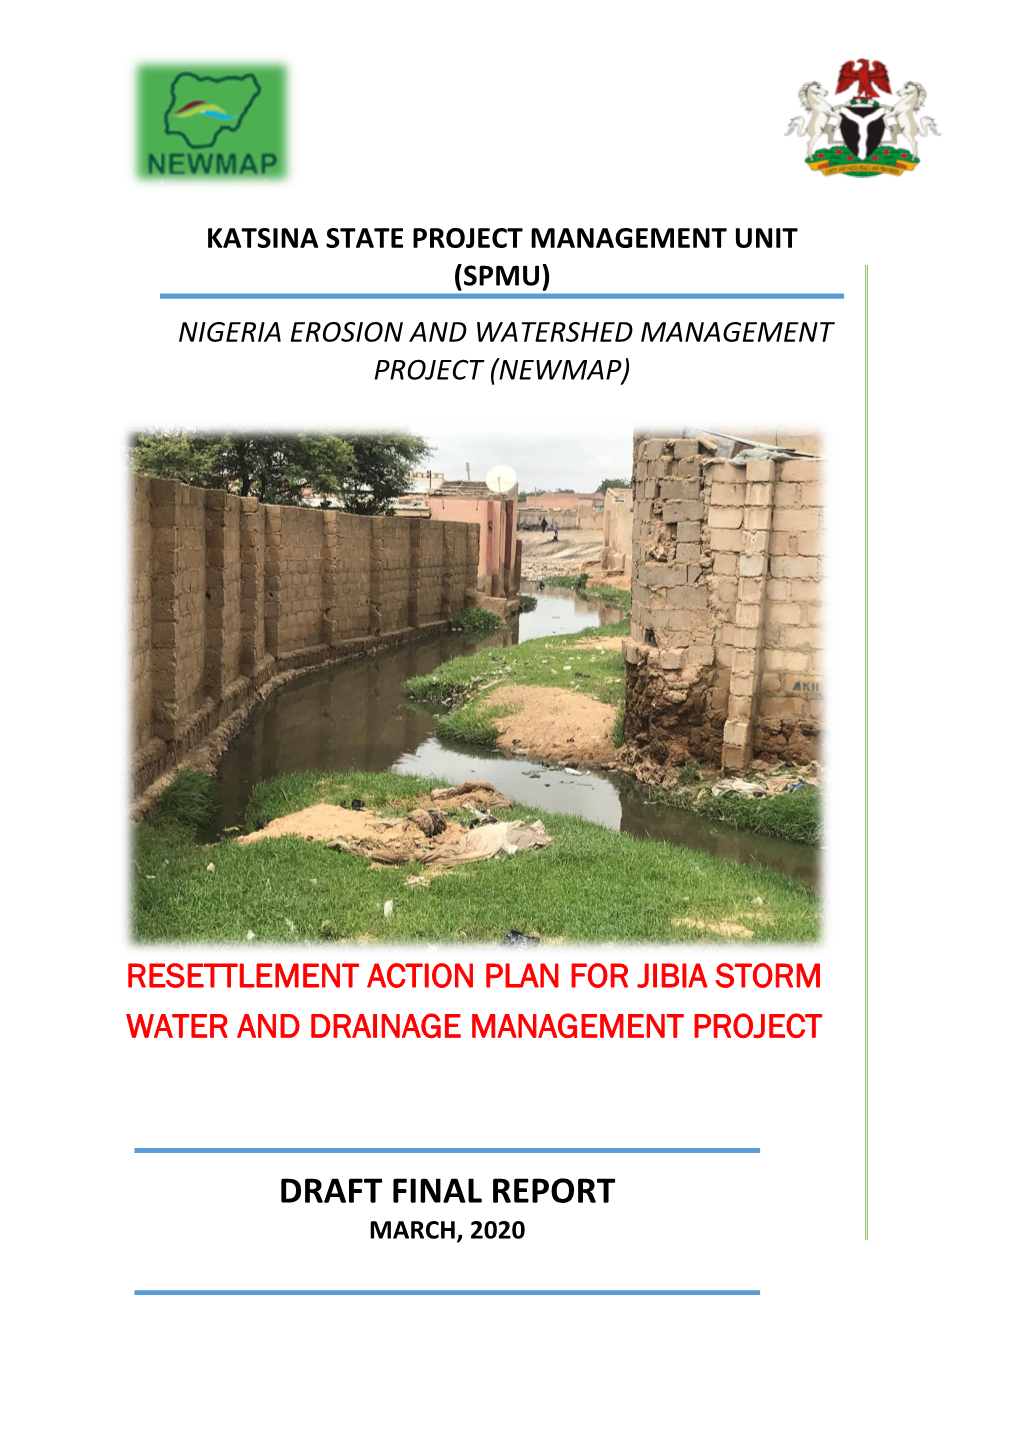 Resettlement Action Plan for Jibia Storm Water and Drainage Management Project